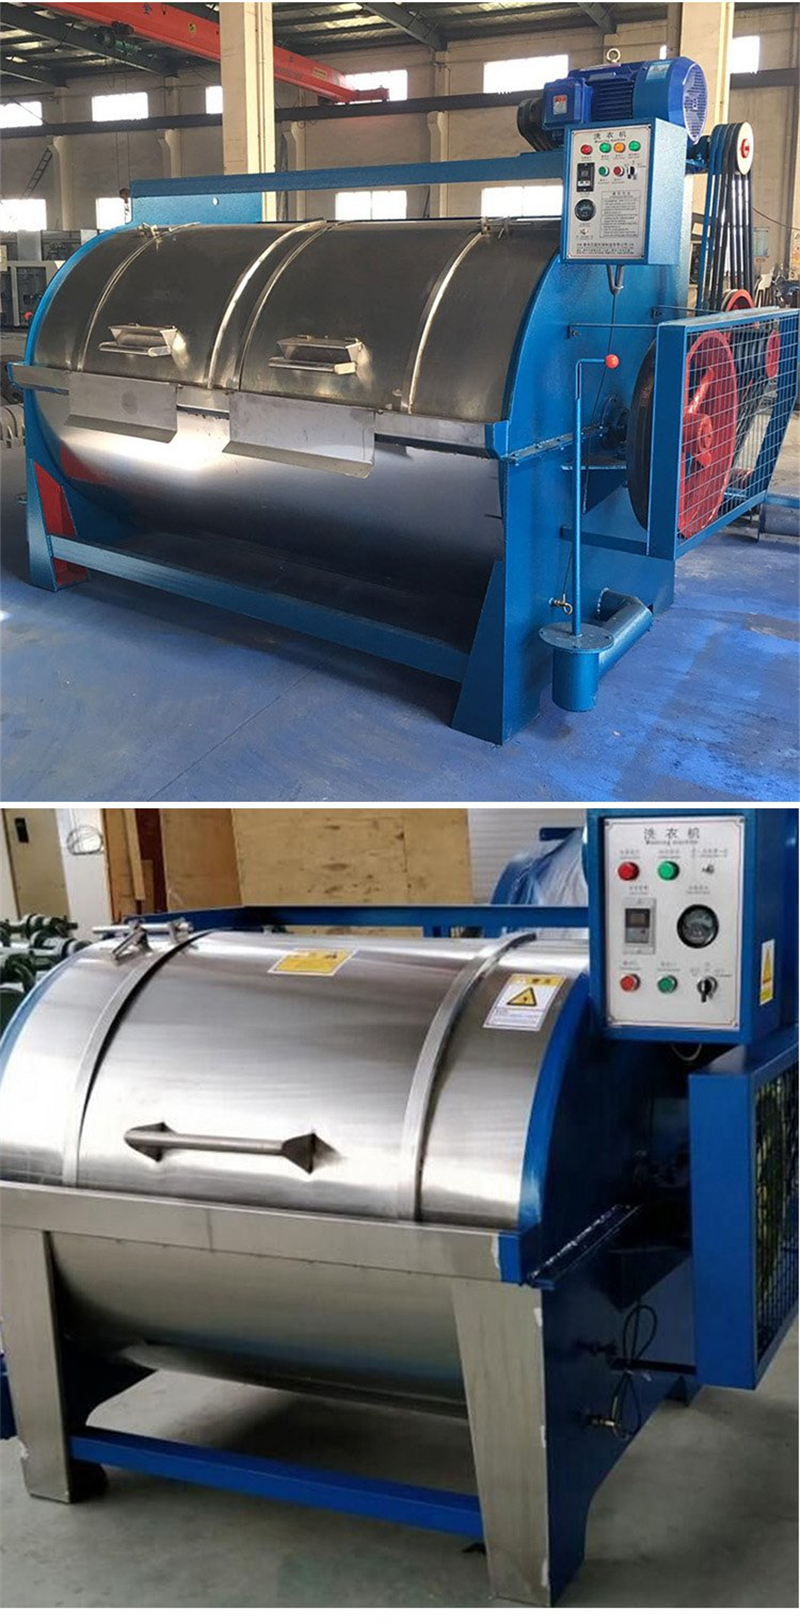 Dolphin brand 300 kg industrial washing machine, clothing and textile factory, large washing and dyeing dual-purpose machine for clothing and fabric